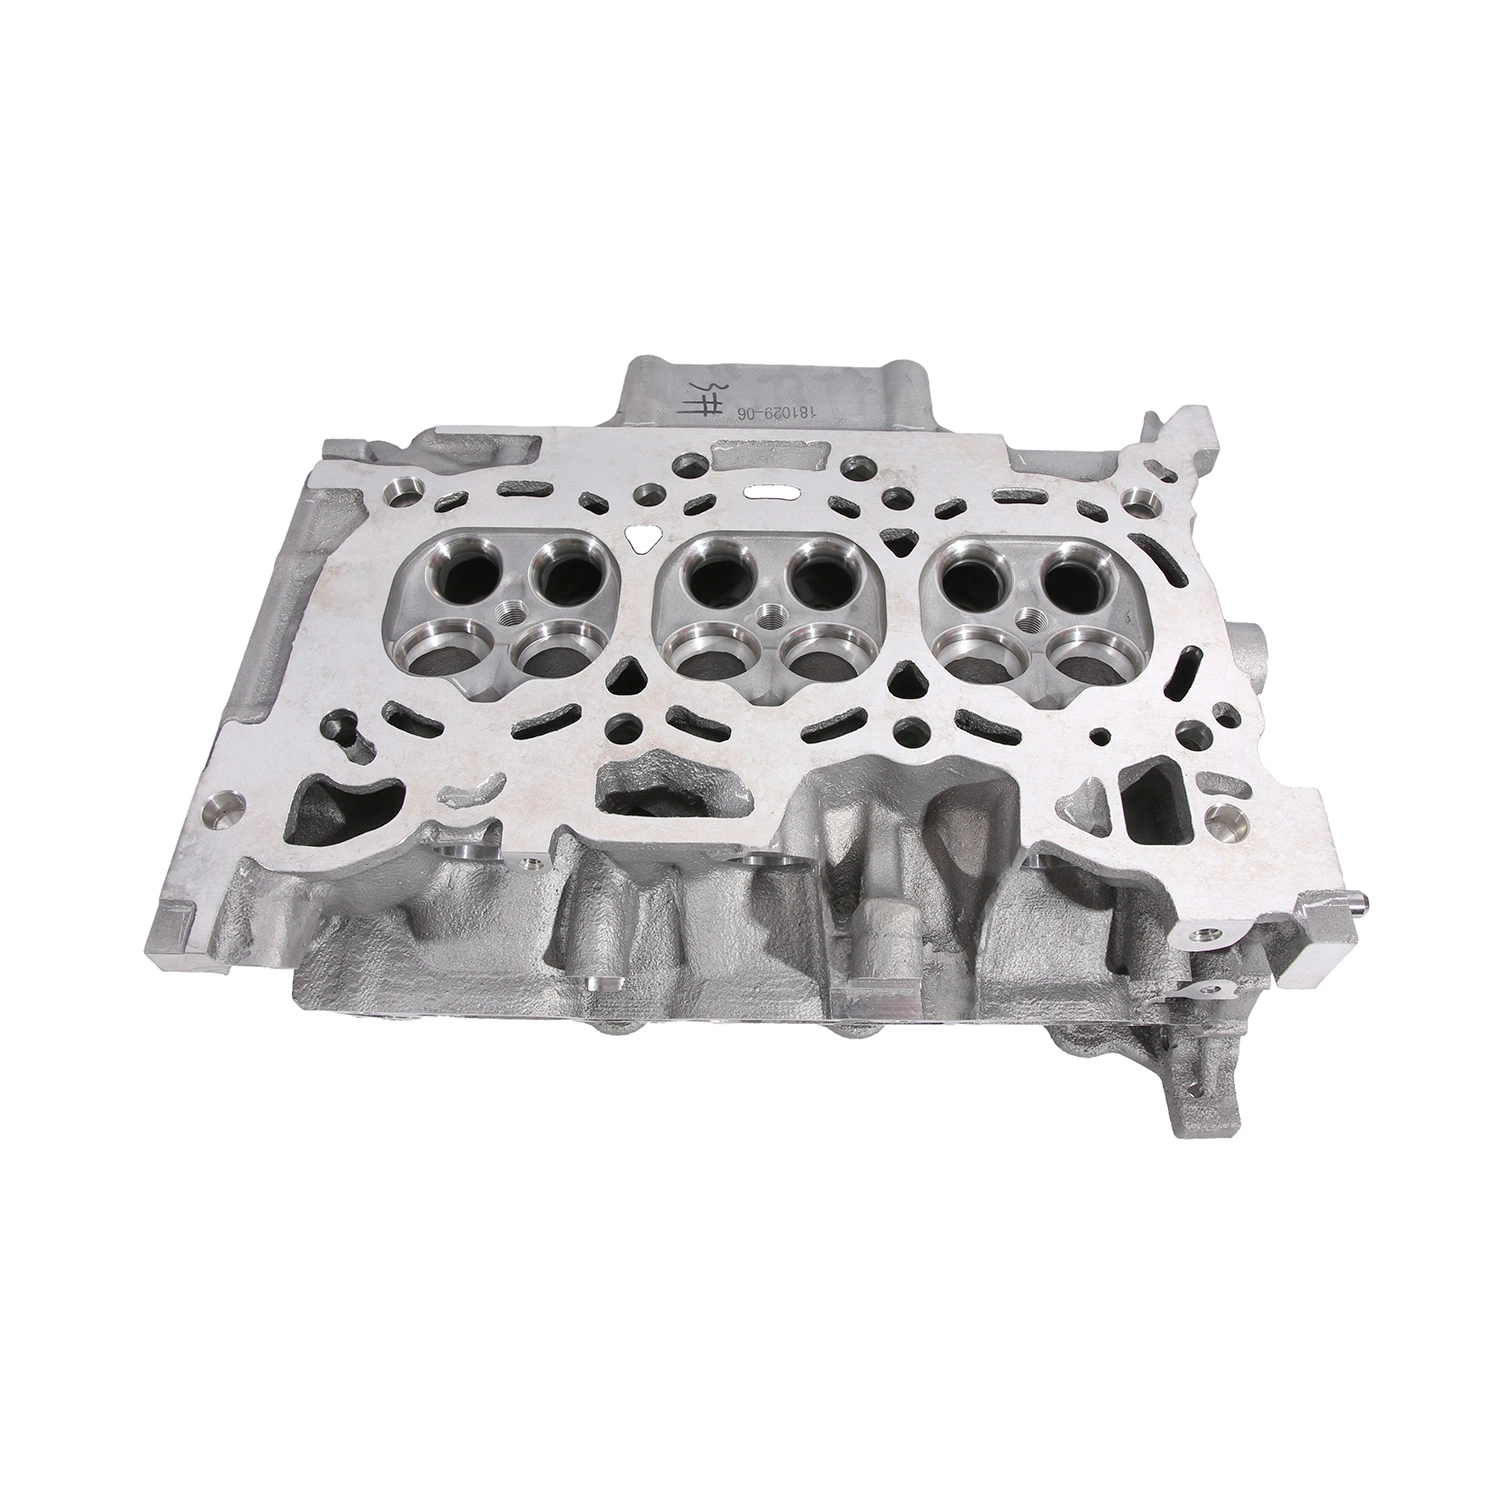 OEM Customized Machinery Auto Motorcycle Clutch Transmission Spare Parts by Rapid Prototyping 3D Printing Sand Casting Pressure Casting Car Battery Housing